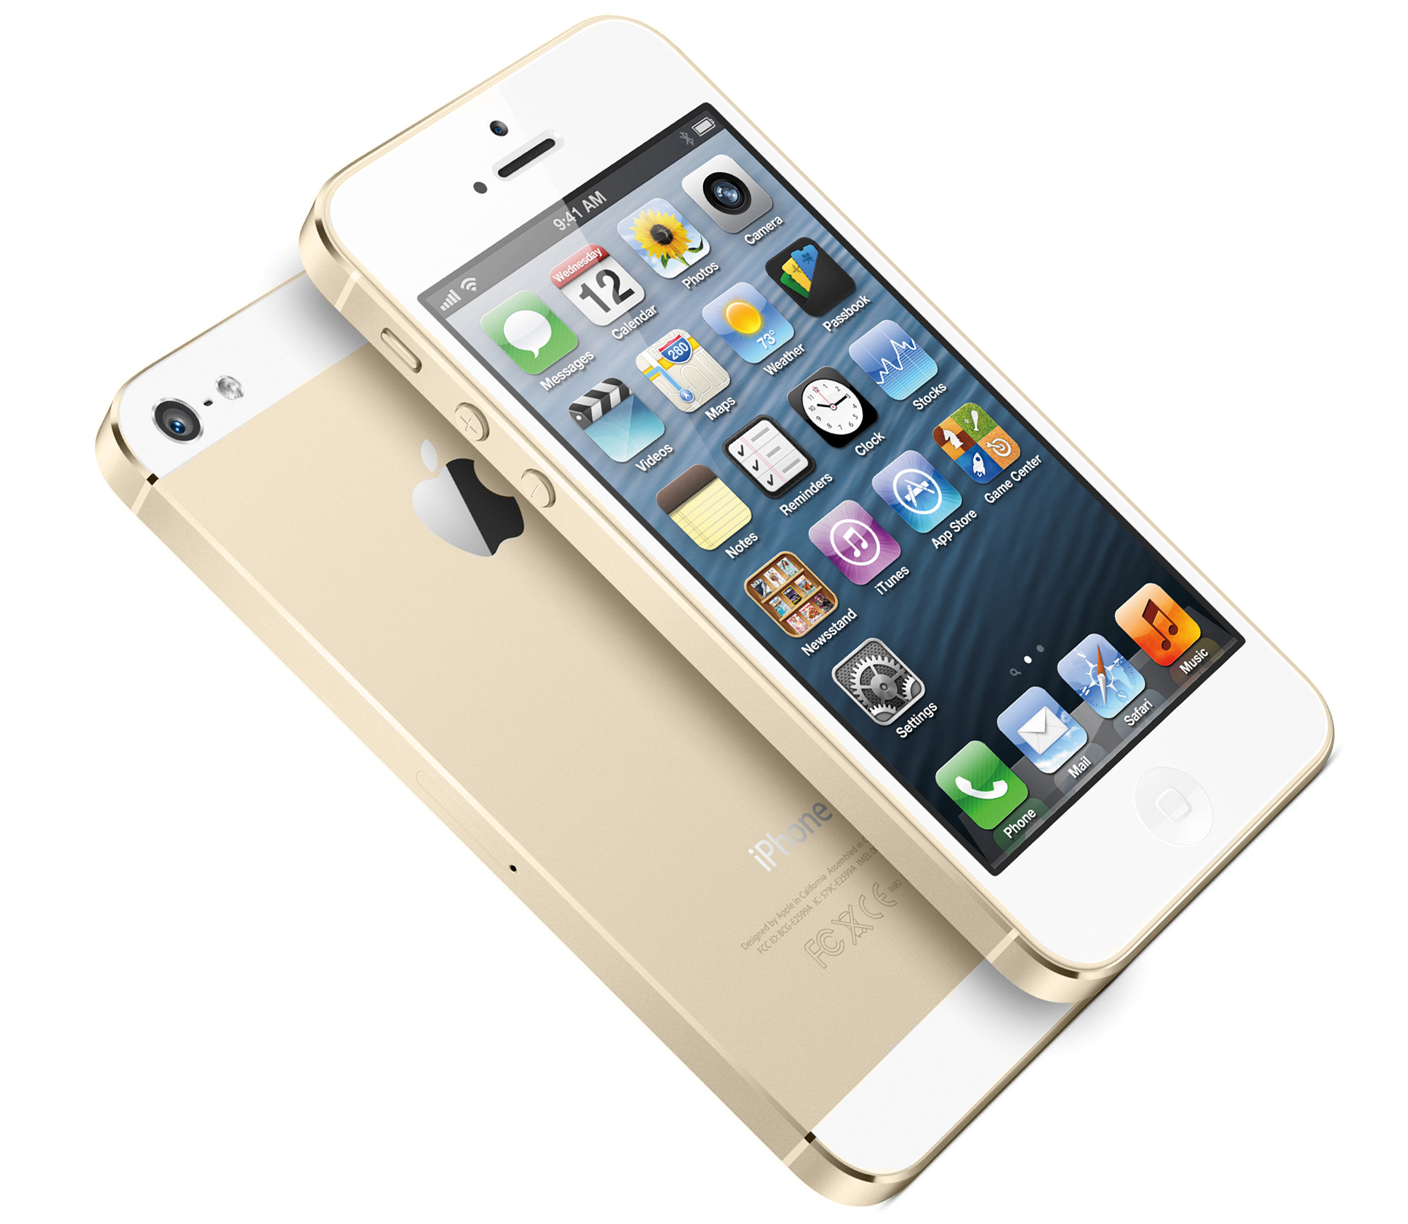 Gold iPhone 5s Sold for $10,000 at eBay